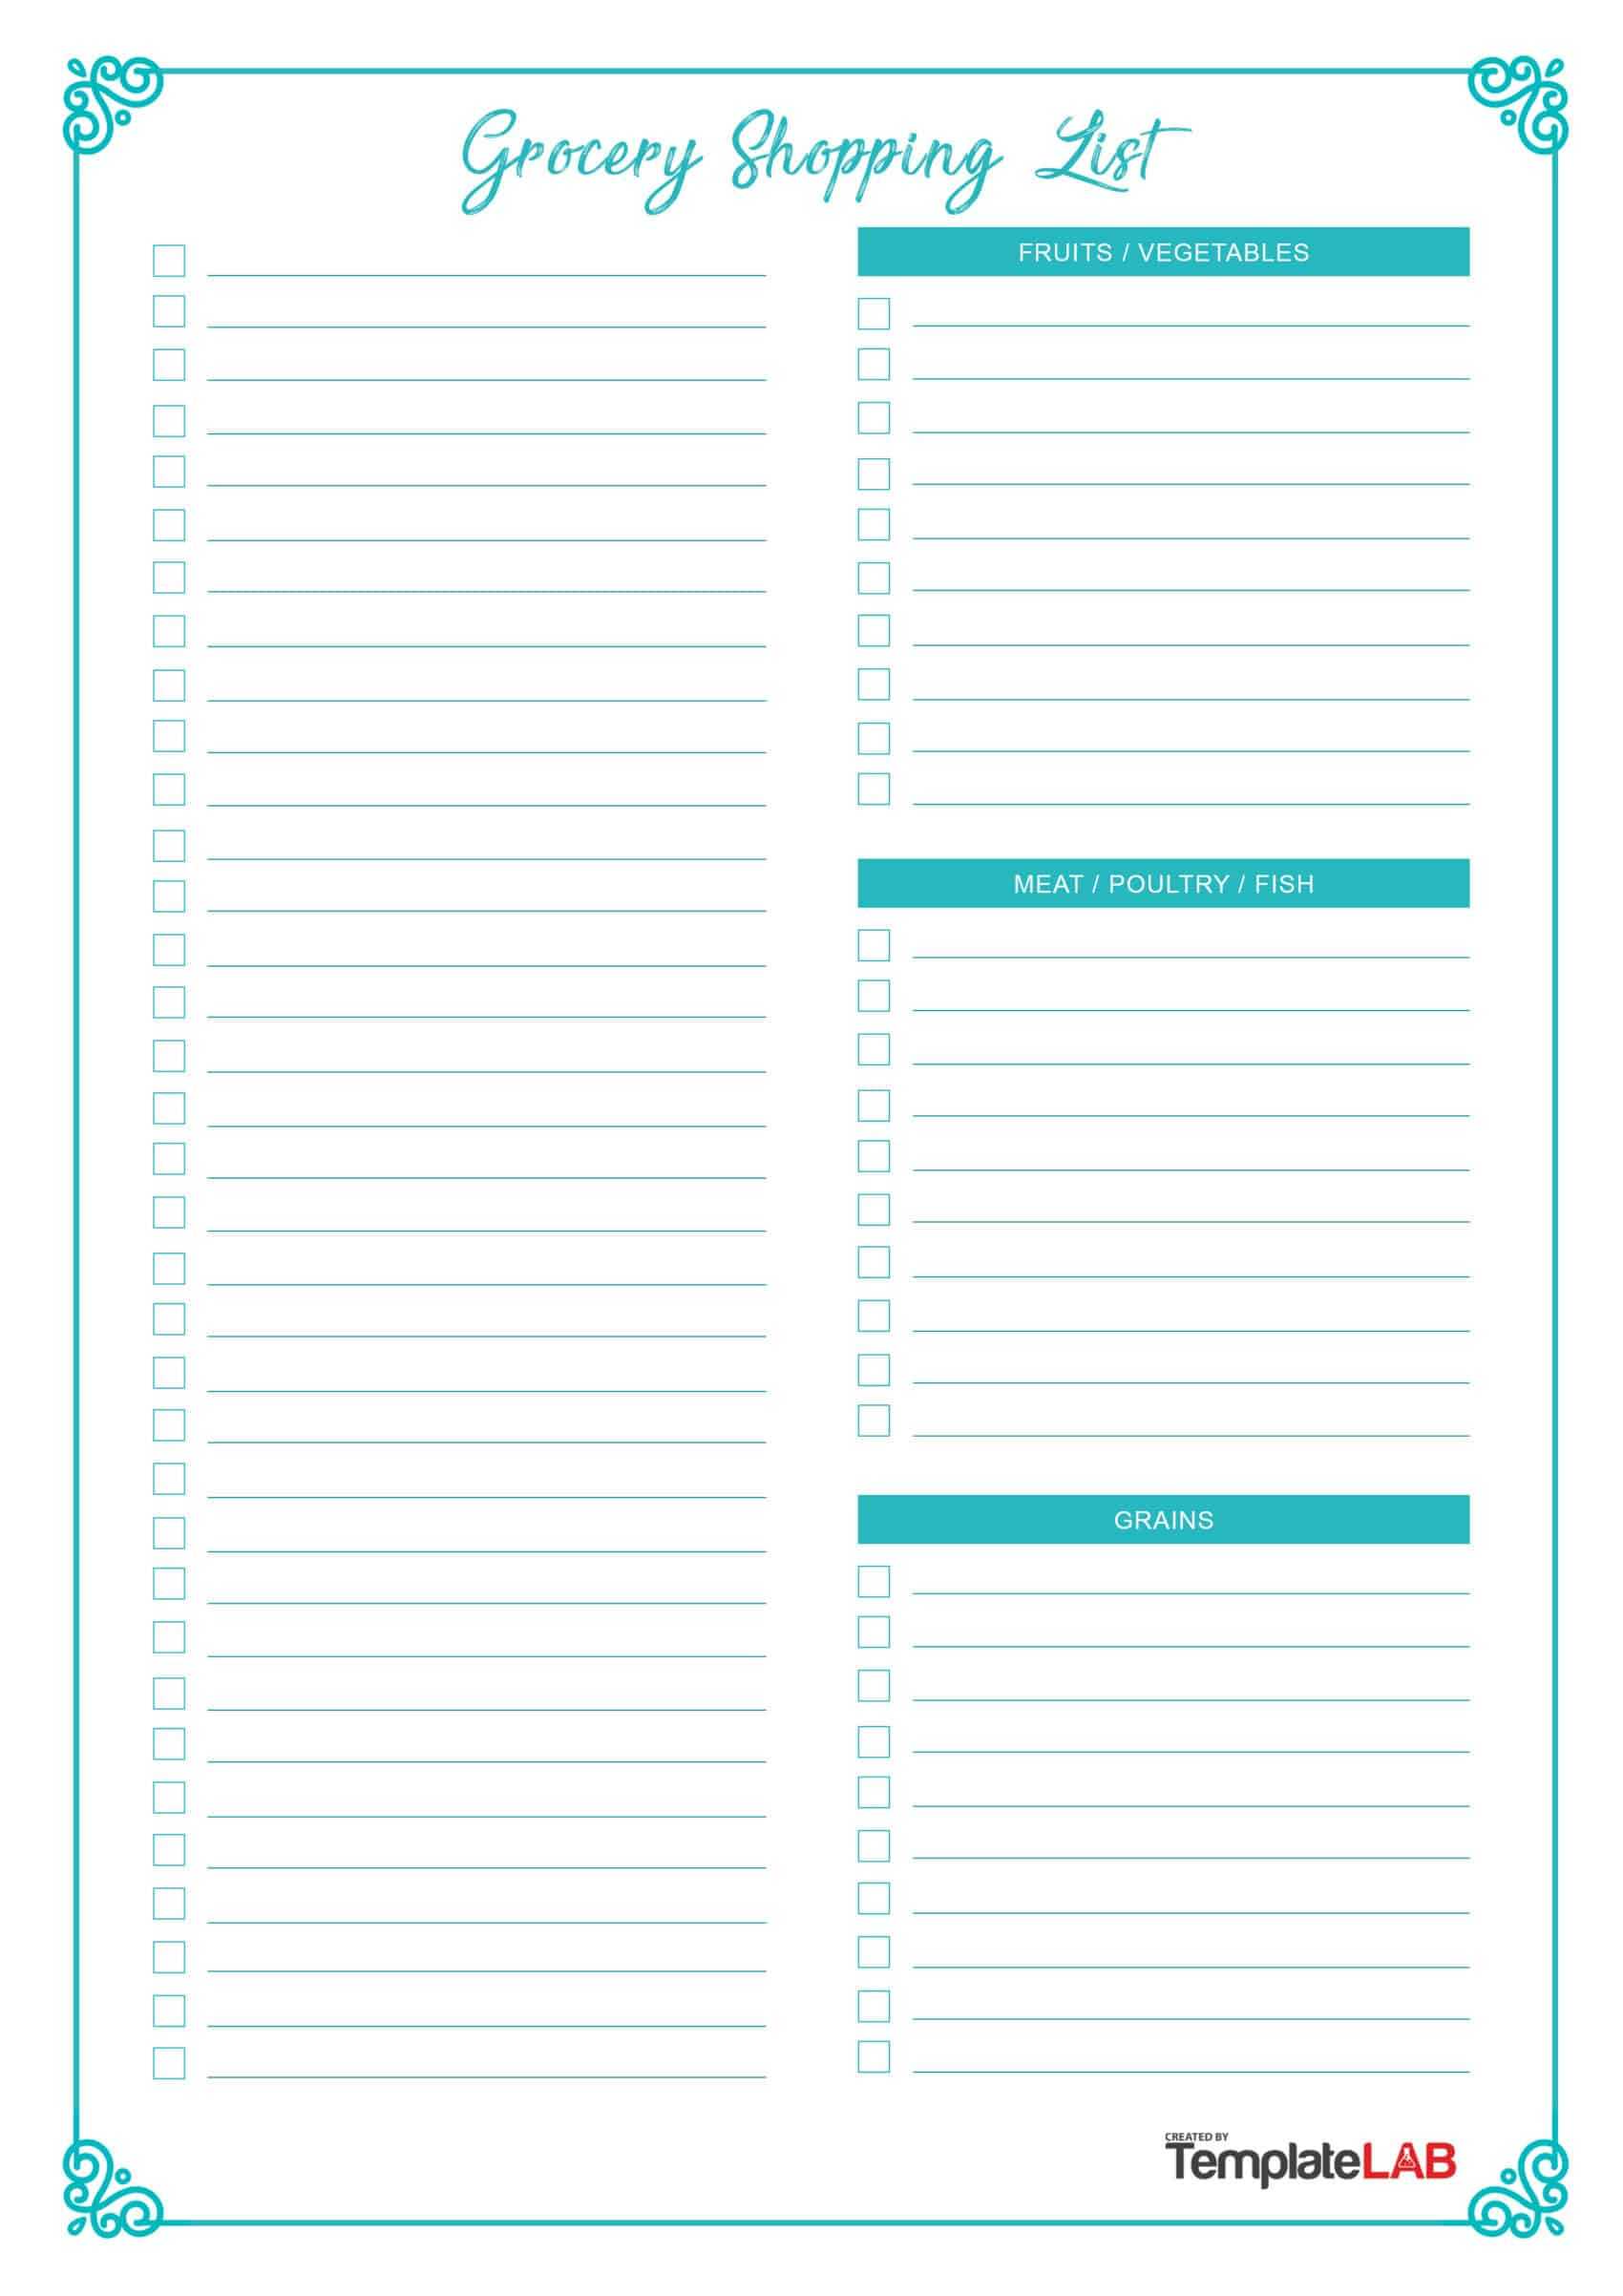 40+ Printable Grocery List Templates (Shopping List) ᐅ Pertaining To Blank Grocery Shopping List Template